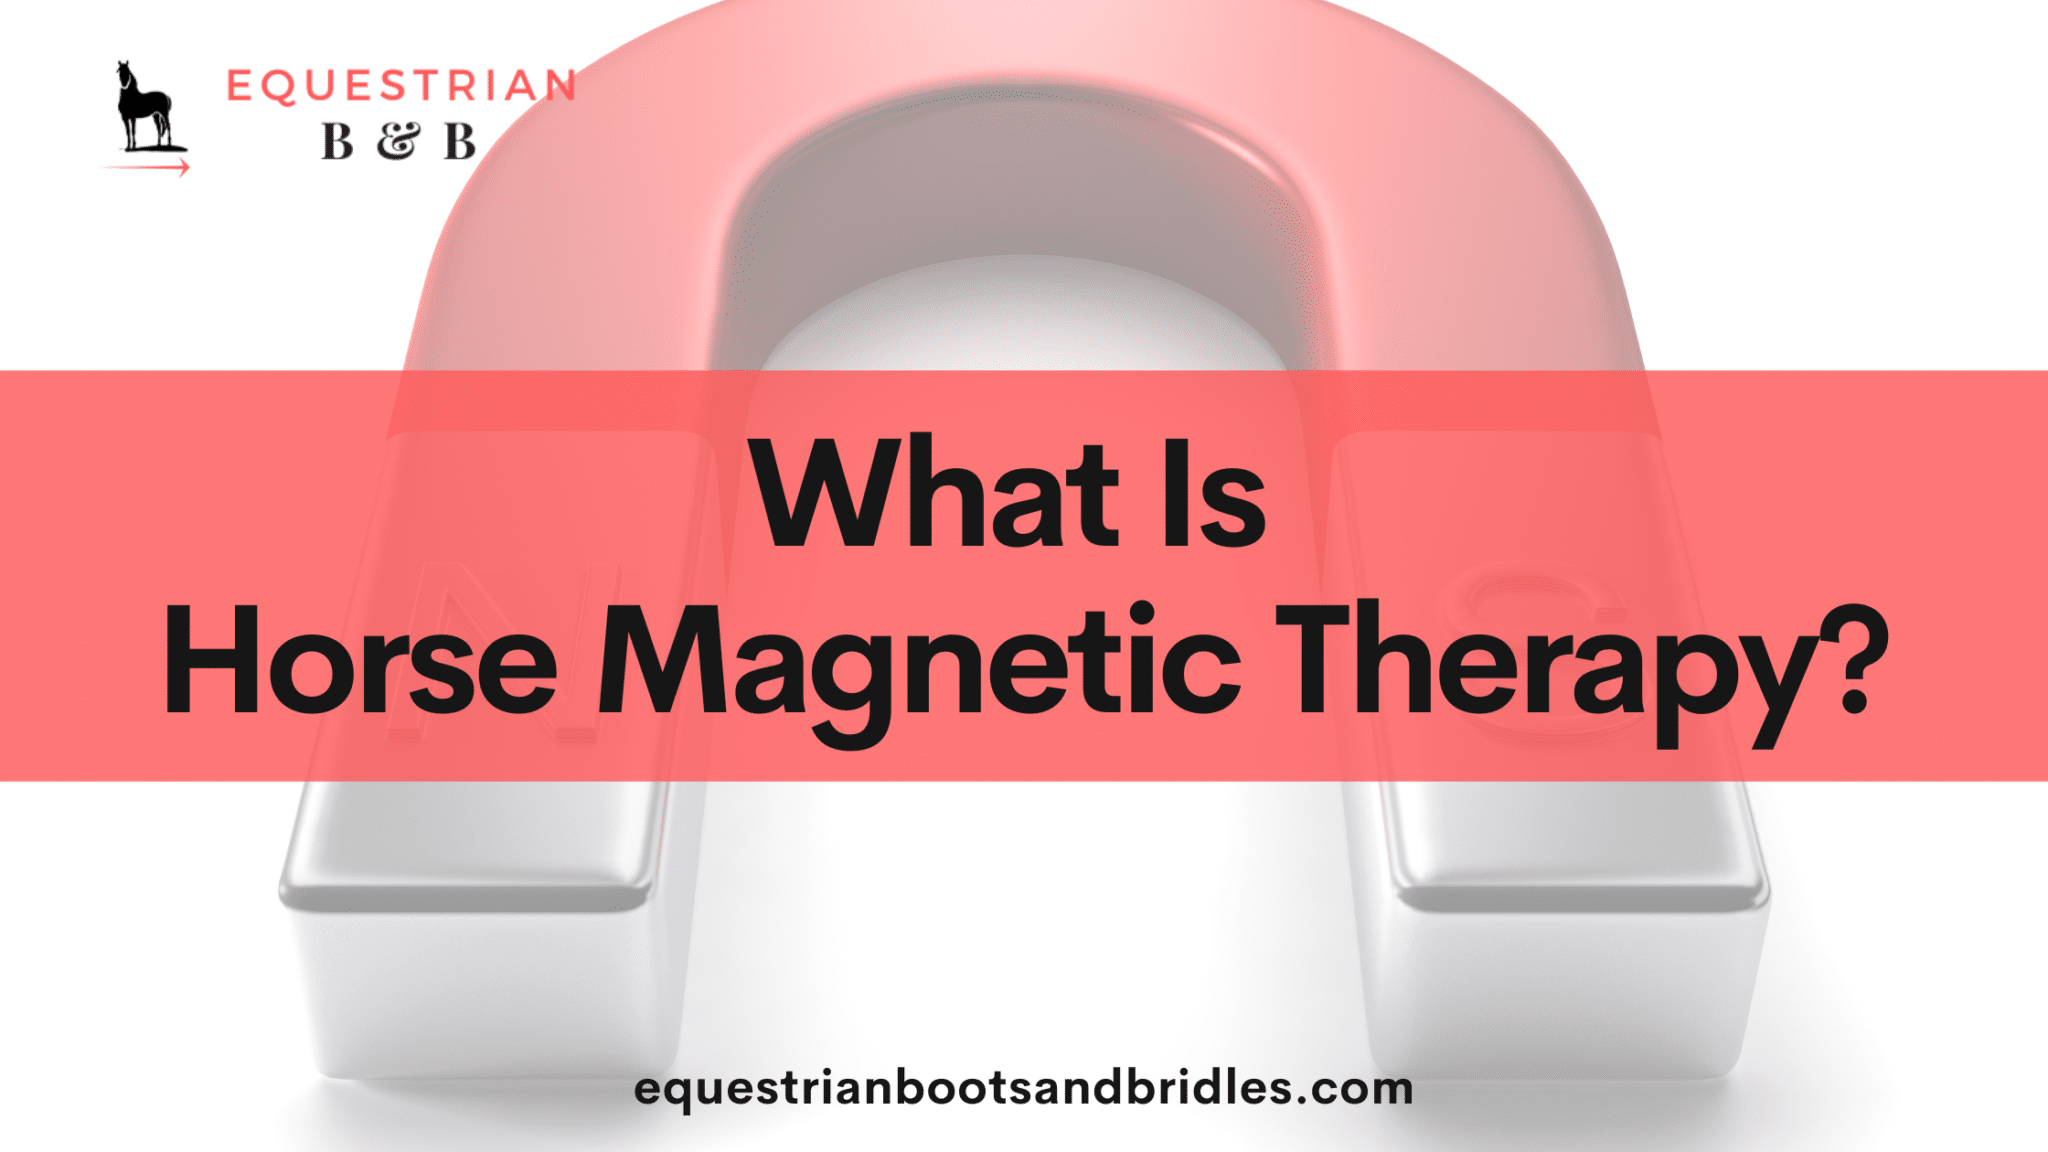 What is horse magnetic therapy on equestrianbootsandbridles.com